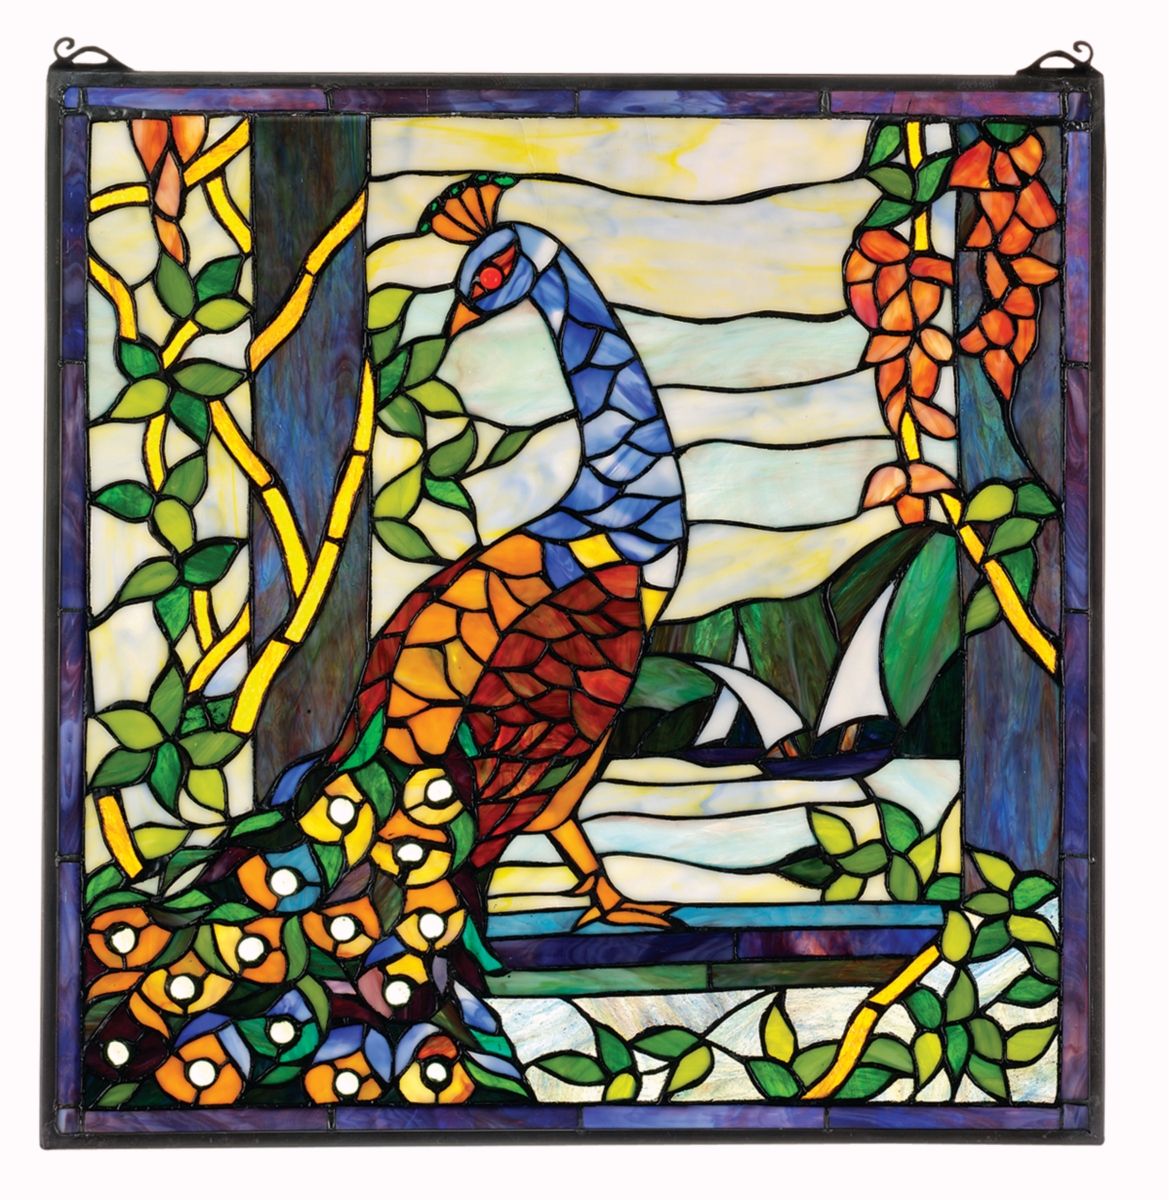 Peacock Garden Stained Glass Window